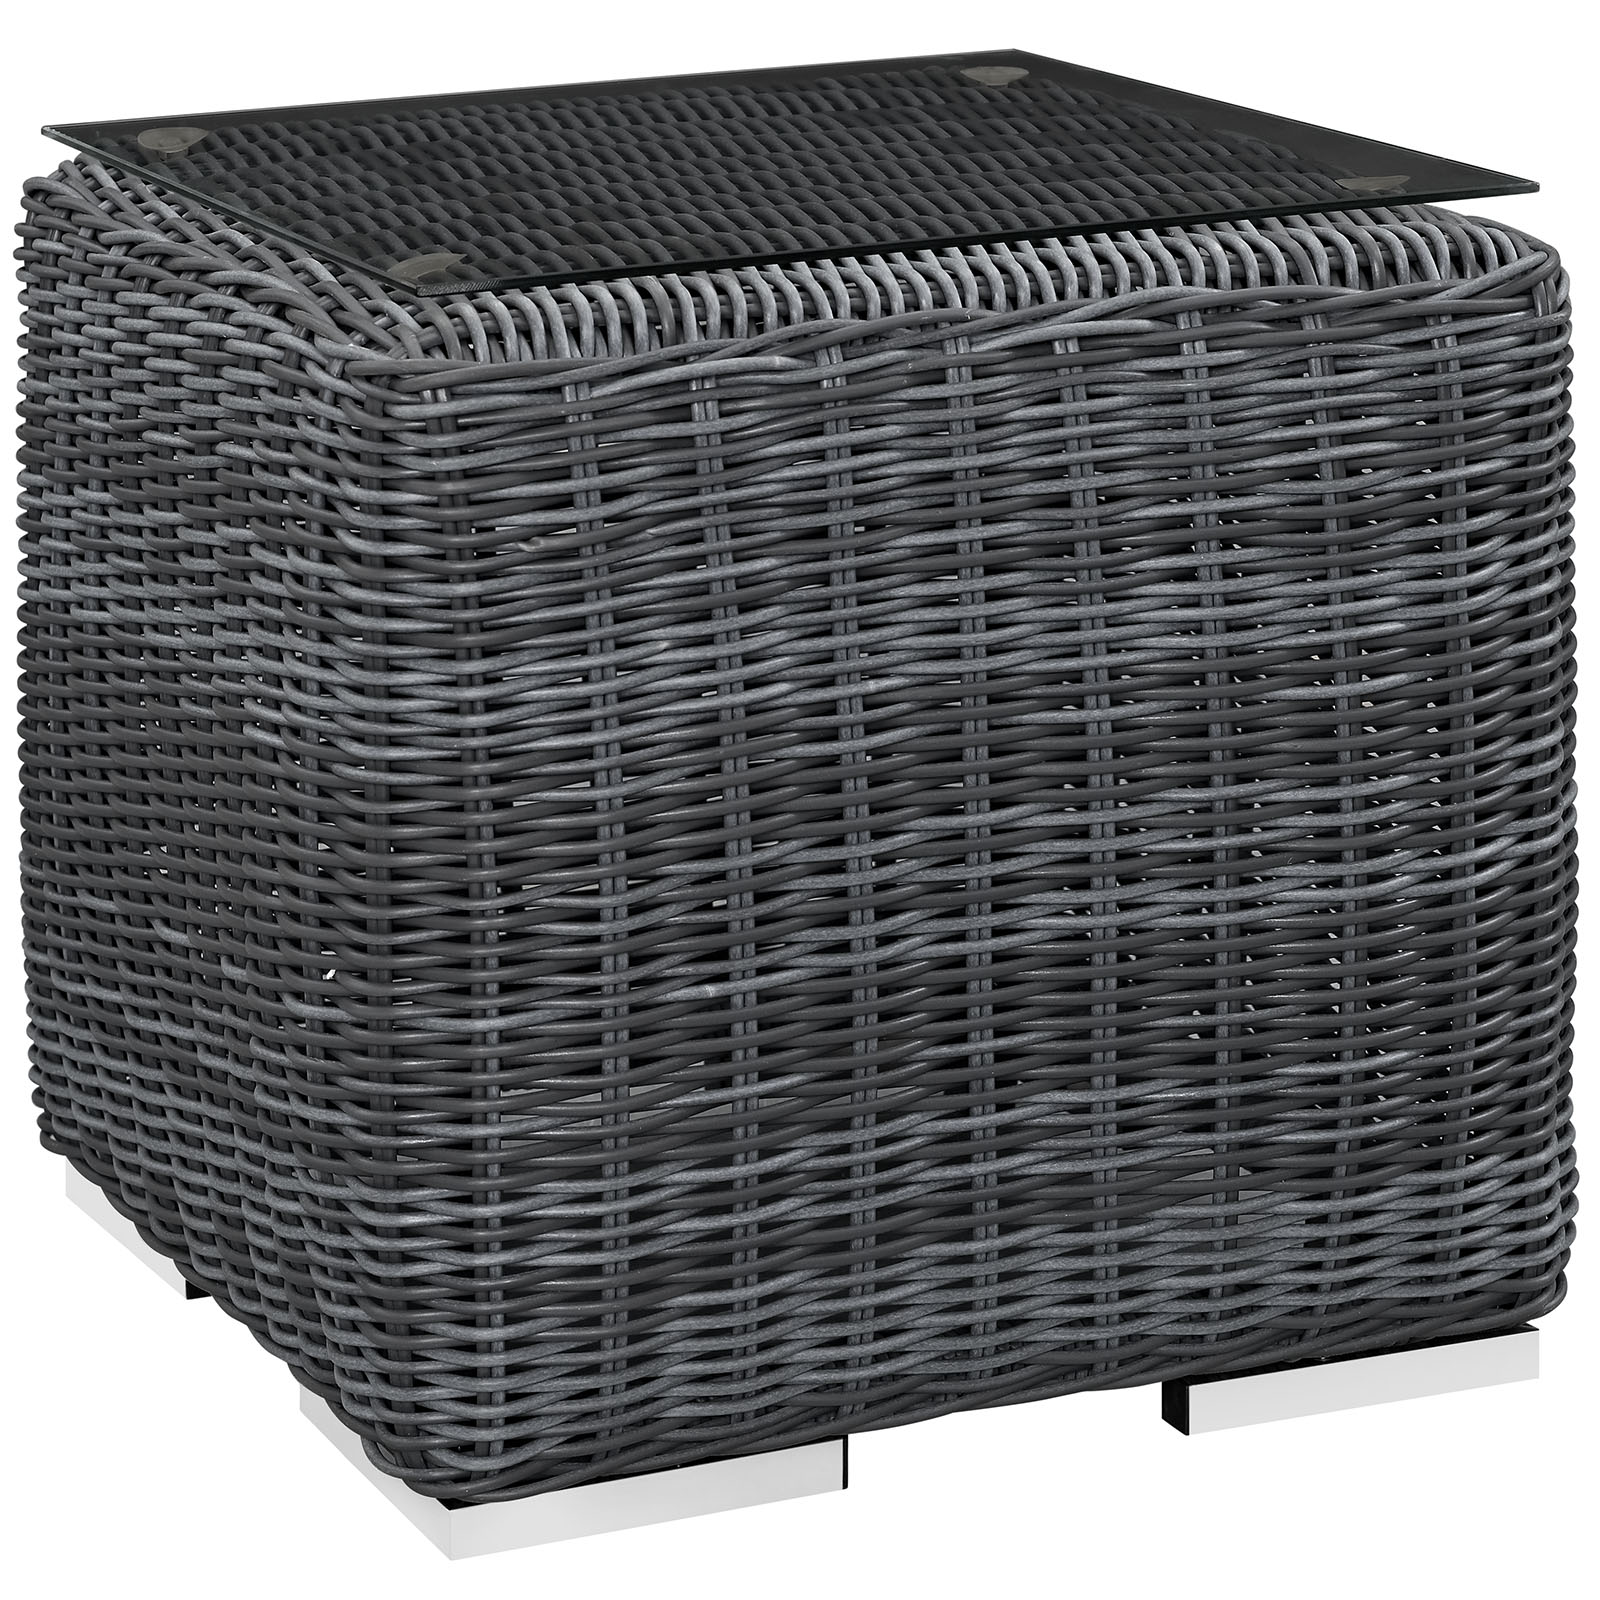 Modern Contemporary Outdoor Patio Side Table, Grey, Fabric, Synthetic Rattan - image 1 of 3